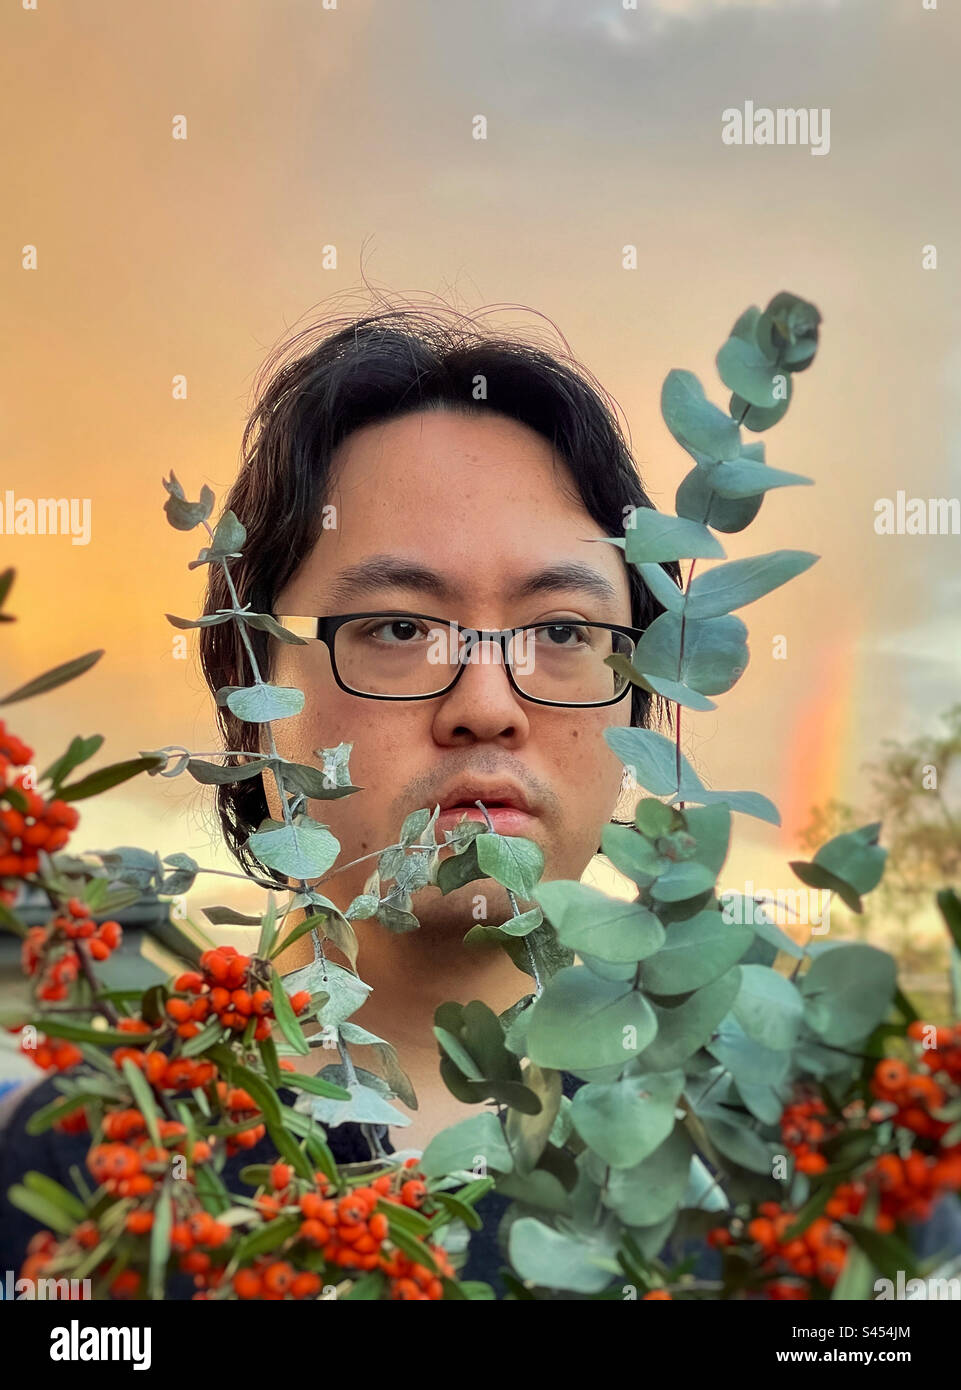 Portrait of young Asian man in eyeglasses with eucalyptus branches and orange Cotoneaster berries against sunset sky with rainbow. Stock Photo